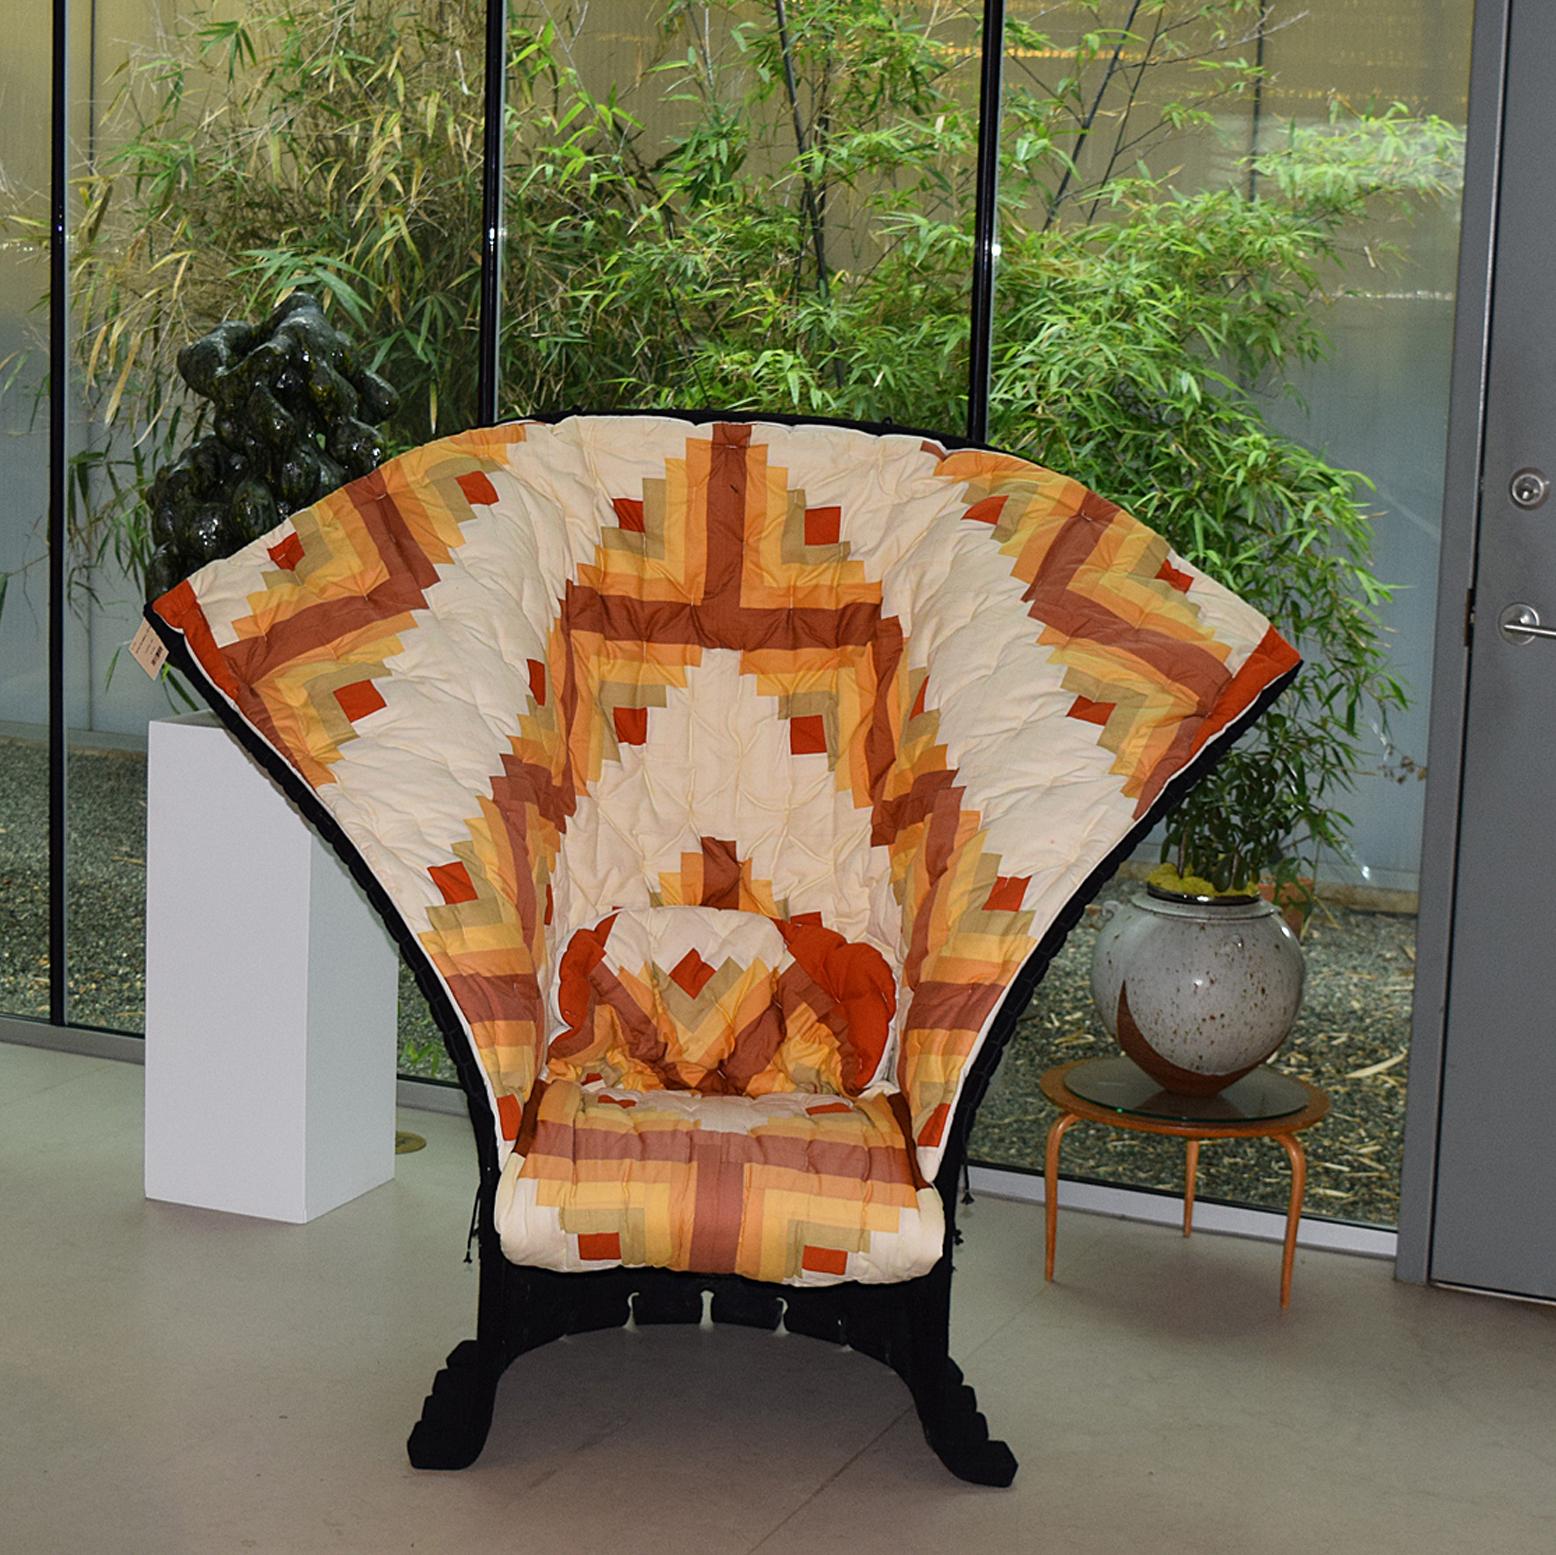 Gaetano Pesce Feltri chair design 1987 Limited Edition Featuring one-of-kind vintage Quilts, selected by Raf Simons for Calvin Klein made by Cassina collection was introduced Design Miami/Basel #56/100
raf simons upholsters 100 cassina feltri